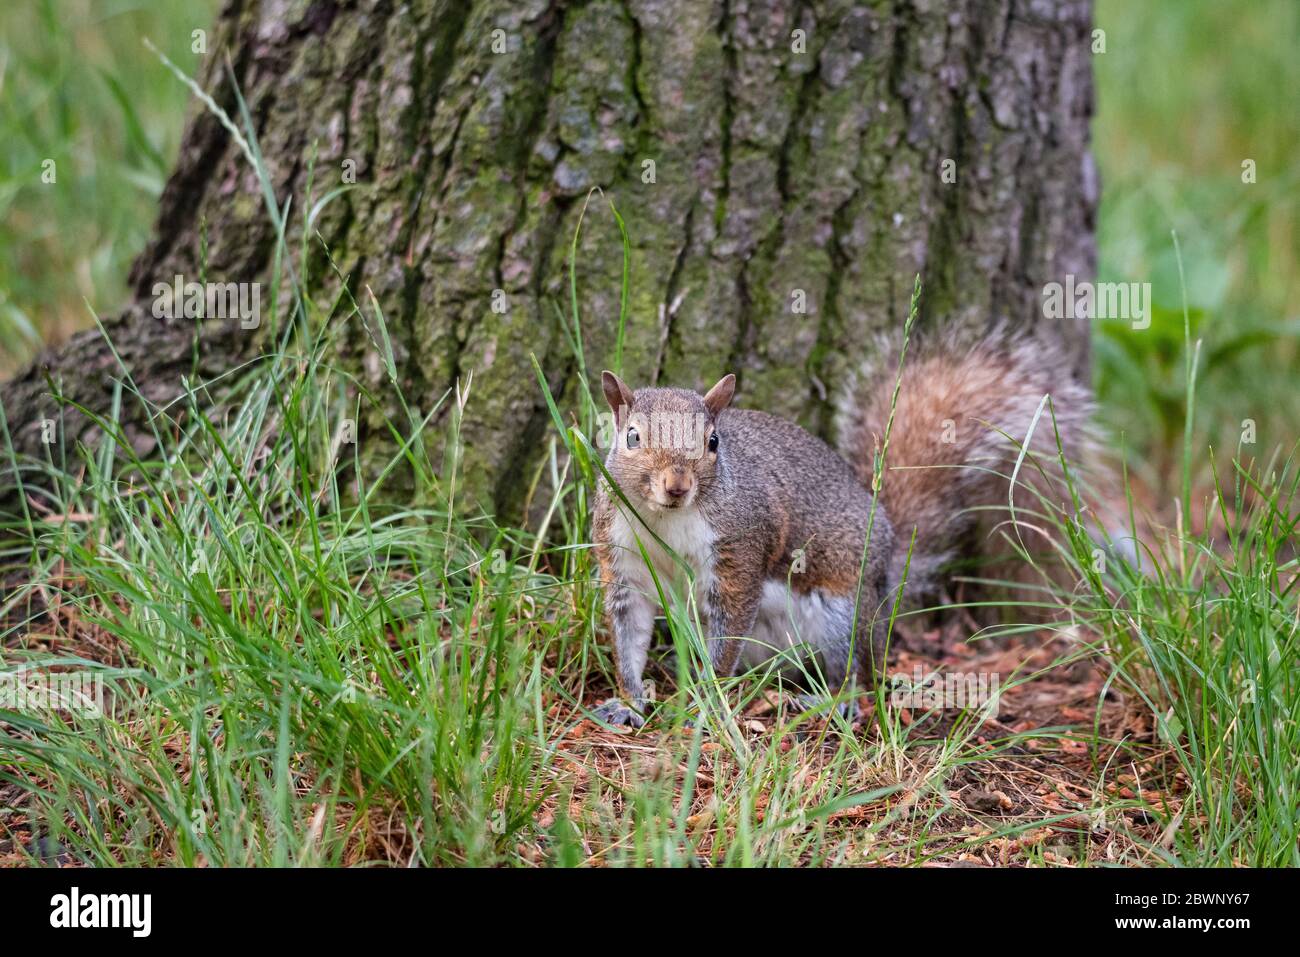 Gray squirrel at the foot of a tree in a wood Stock Photo